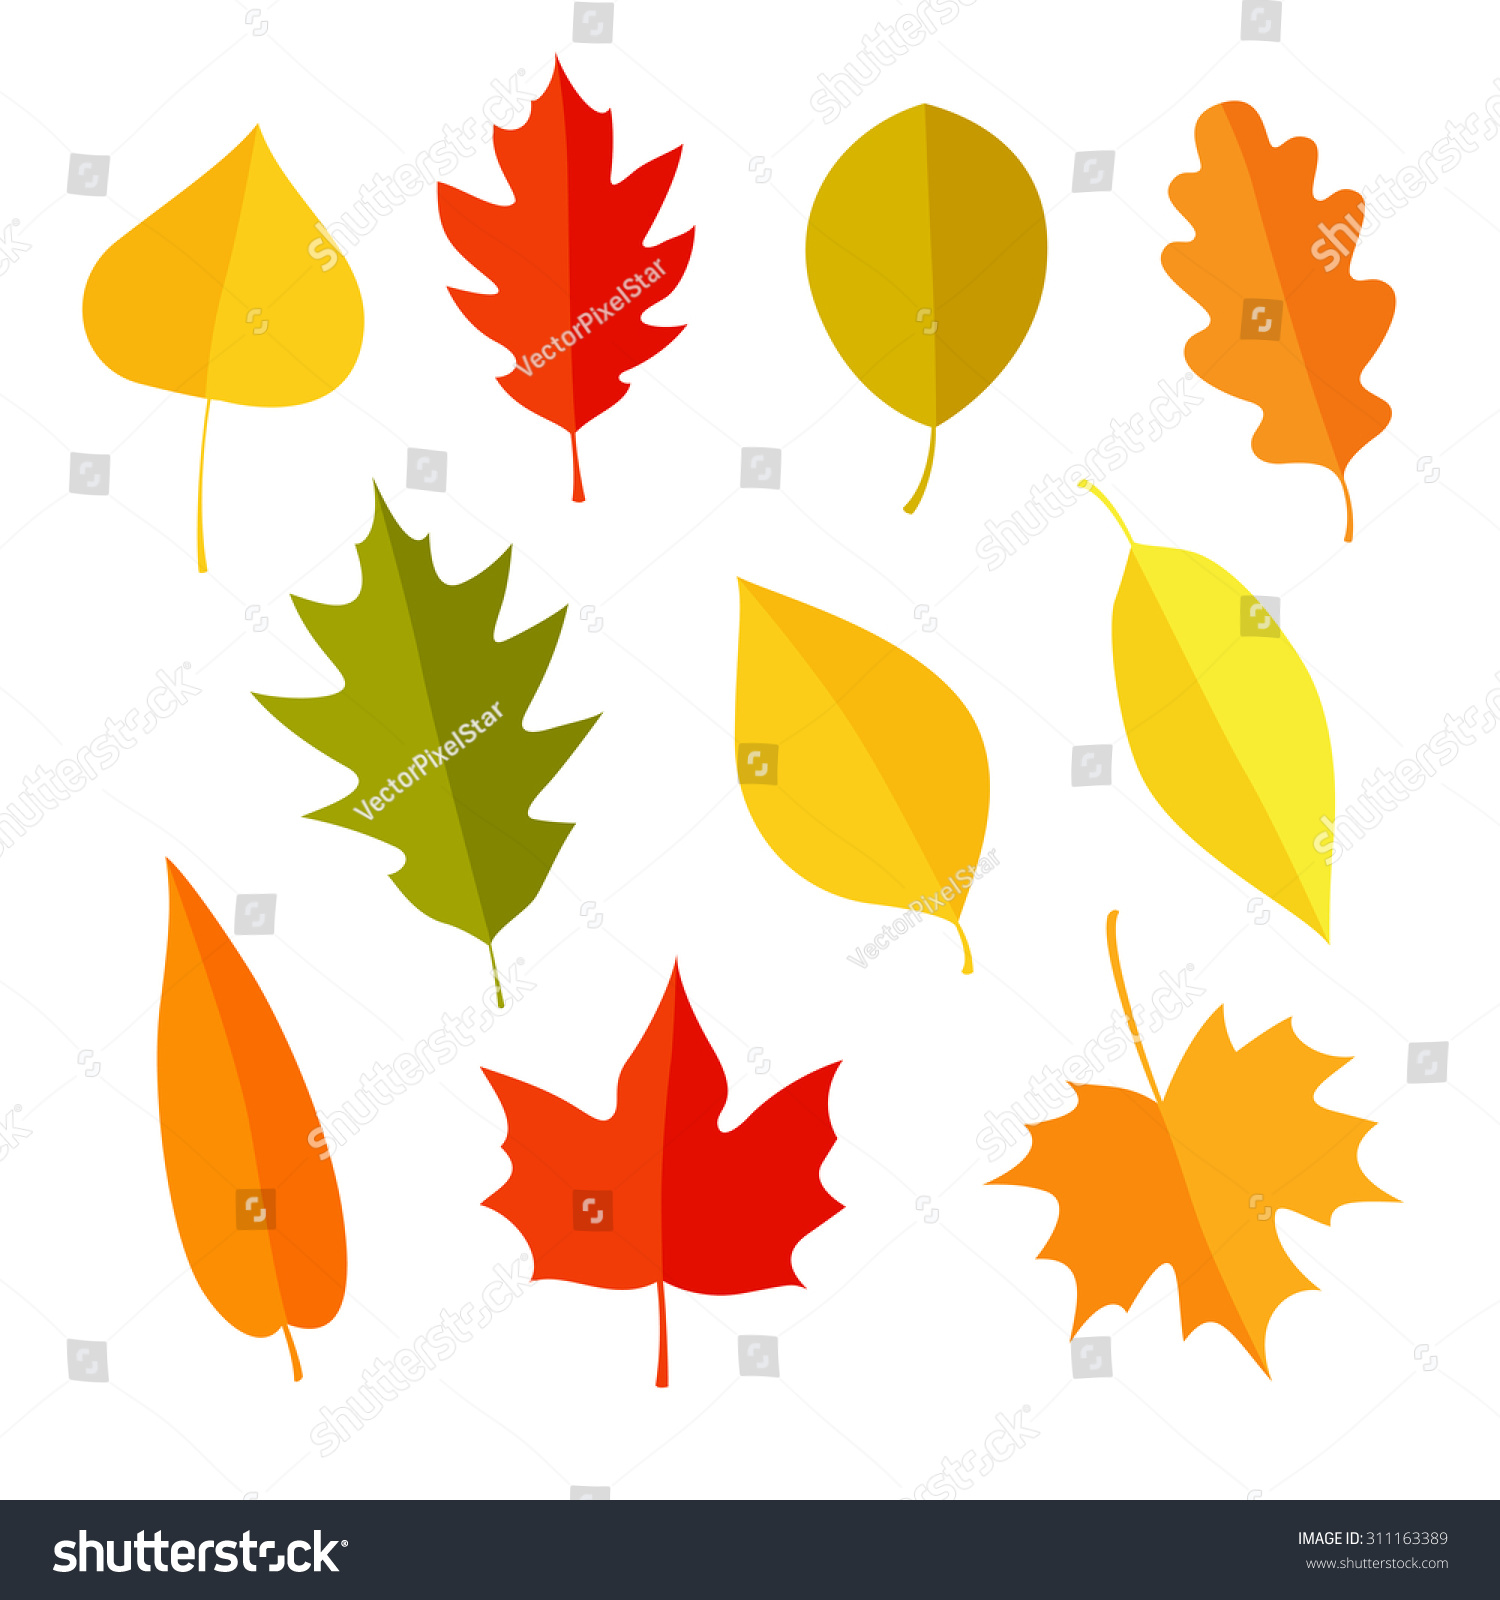 SVG of Autumn leaves set, isolated on white background. Simple cartoon flat style. Isolated vector illustration. Design for stickers, logo, web and mobile app. svg